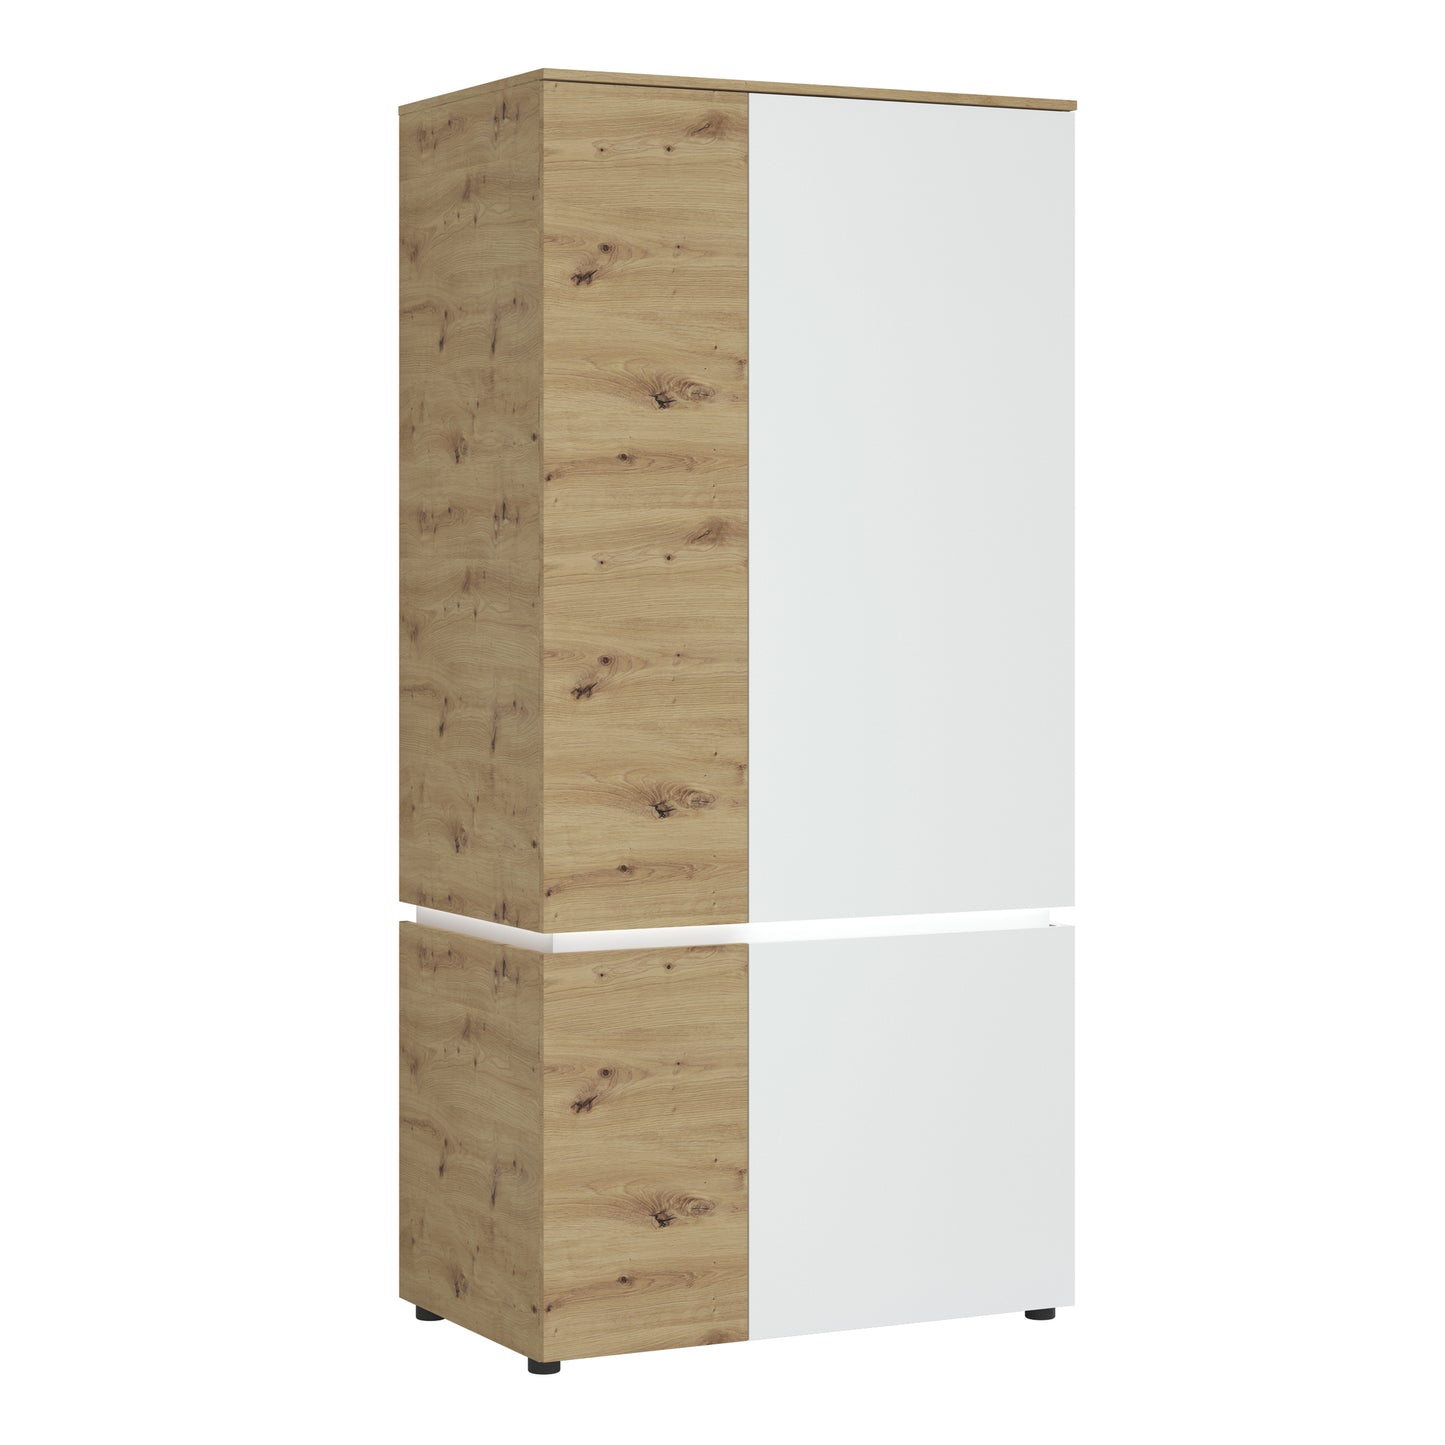 Luci Bright Luci 4 door wardrobe (including LED lighting) in White and Oak